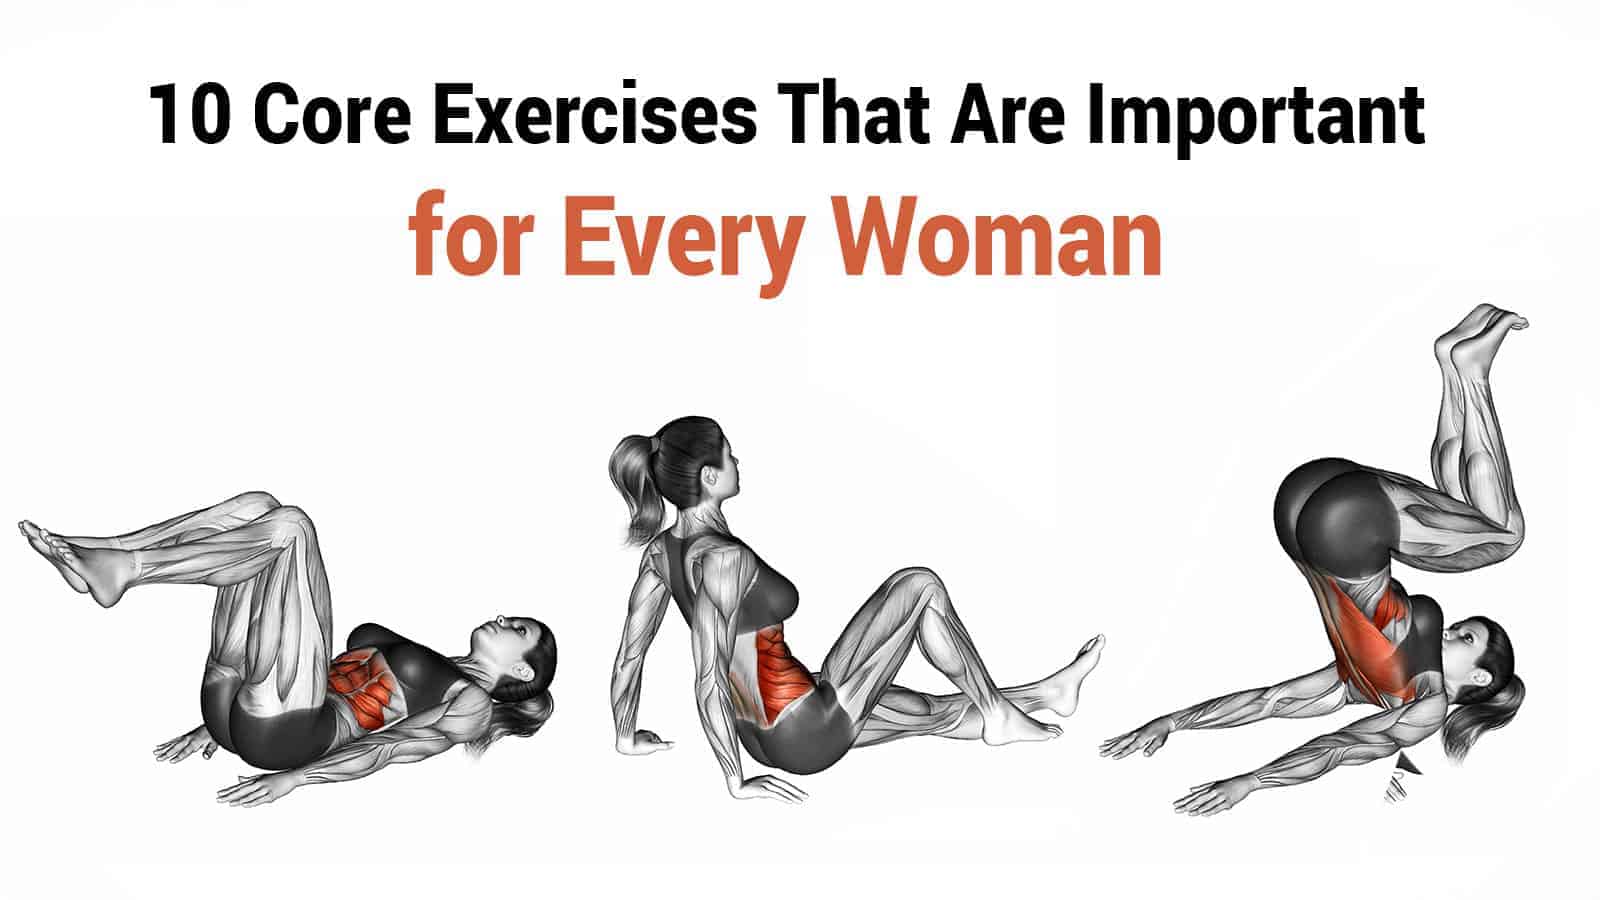 10 Core Exercises That Are Important for Every Woman